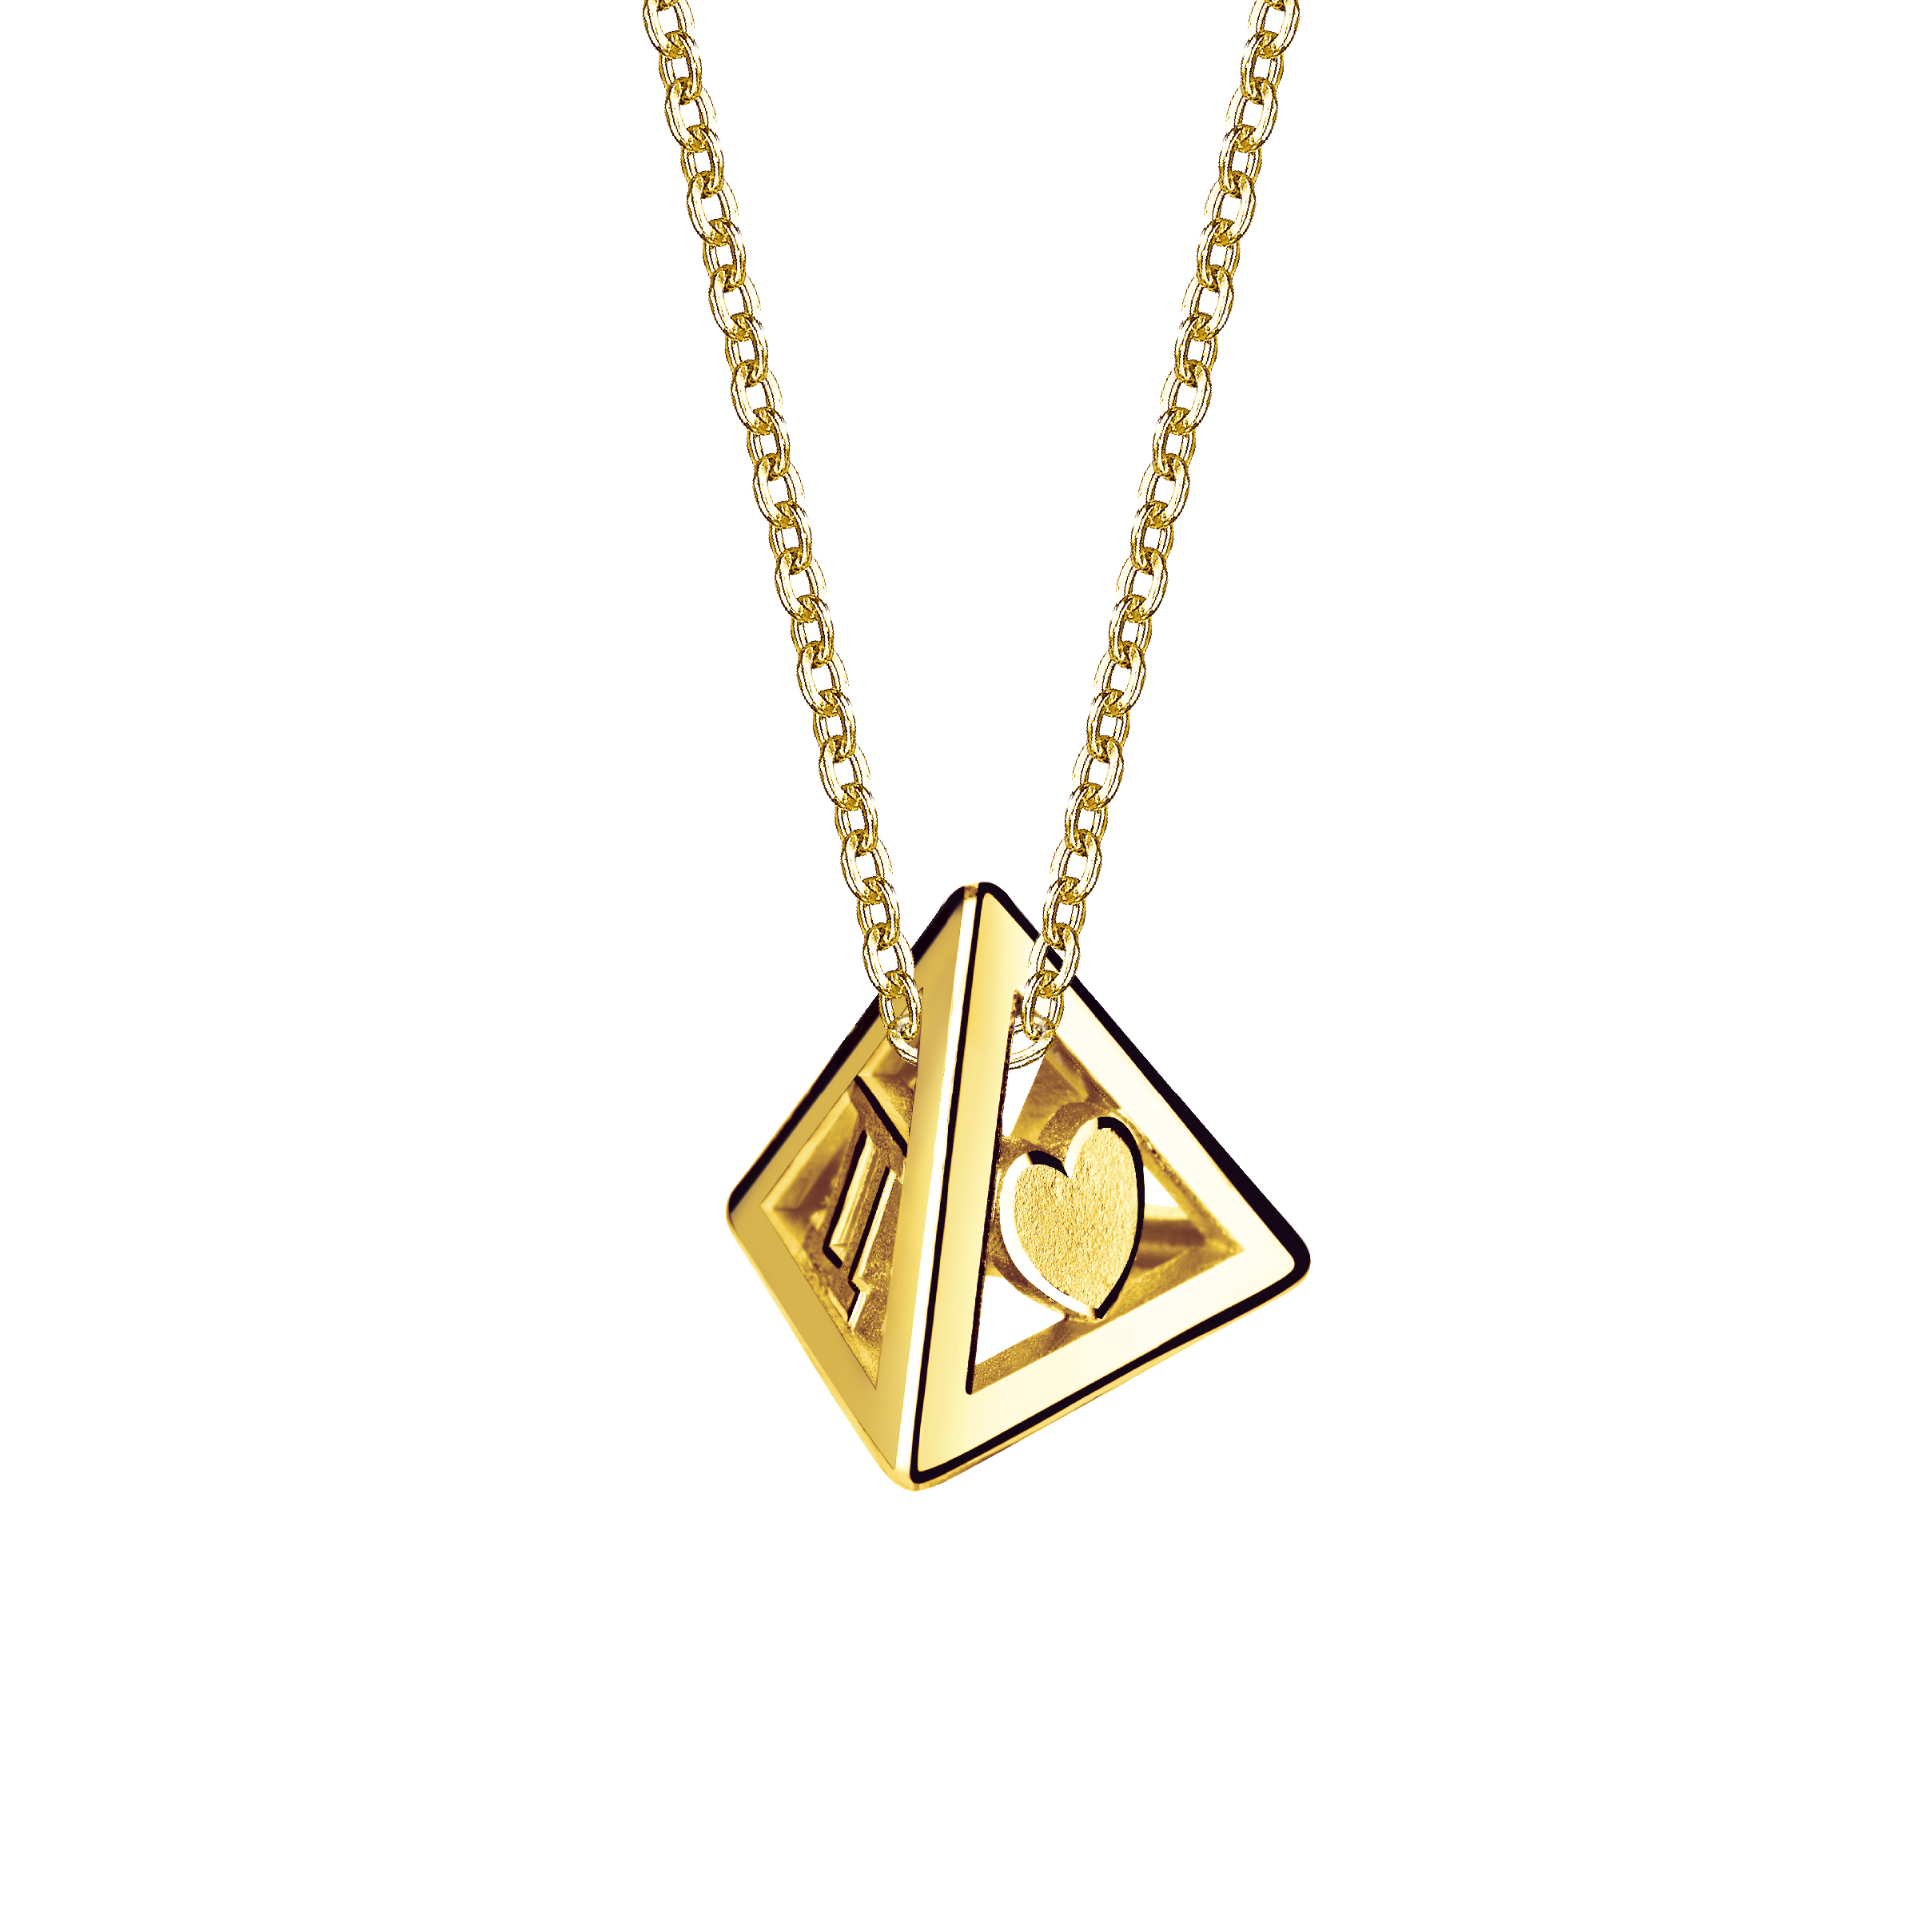 Three Dimensional Gold Necklace